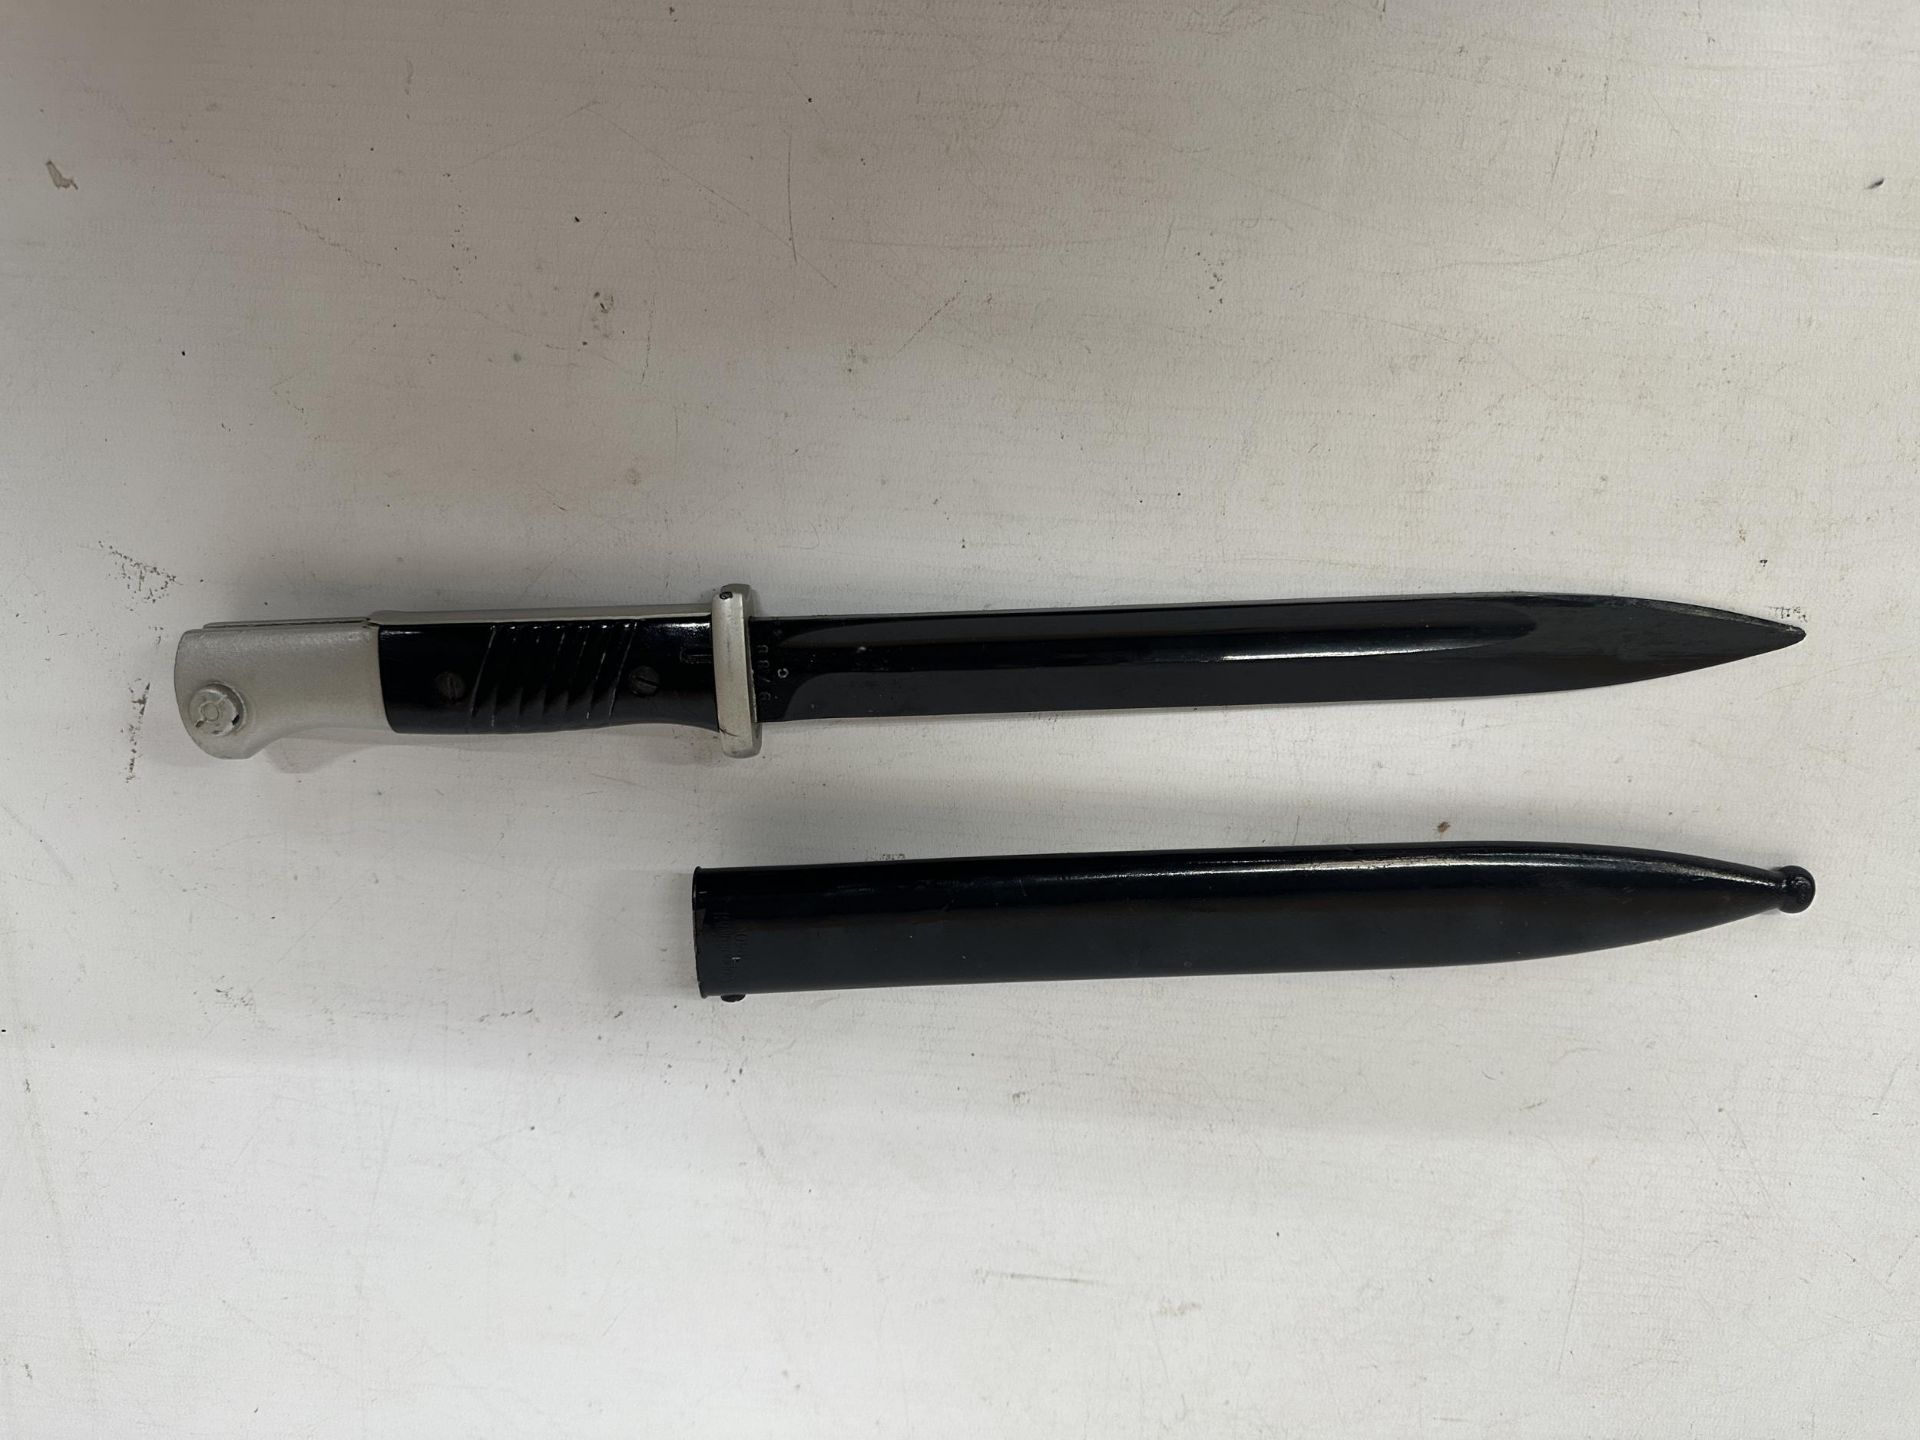 A NAZI GERMANY WWII S 84/98 BAYONET AND SCABBARD, 25CM BLADE, SCABBARD DATED 1940, LENGTH 40.5CM.